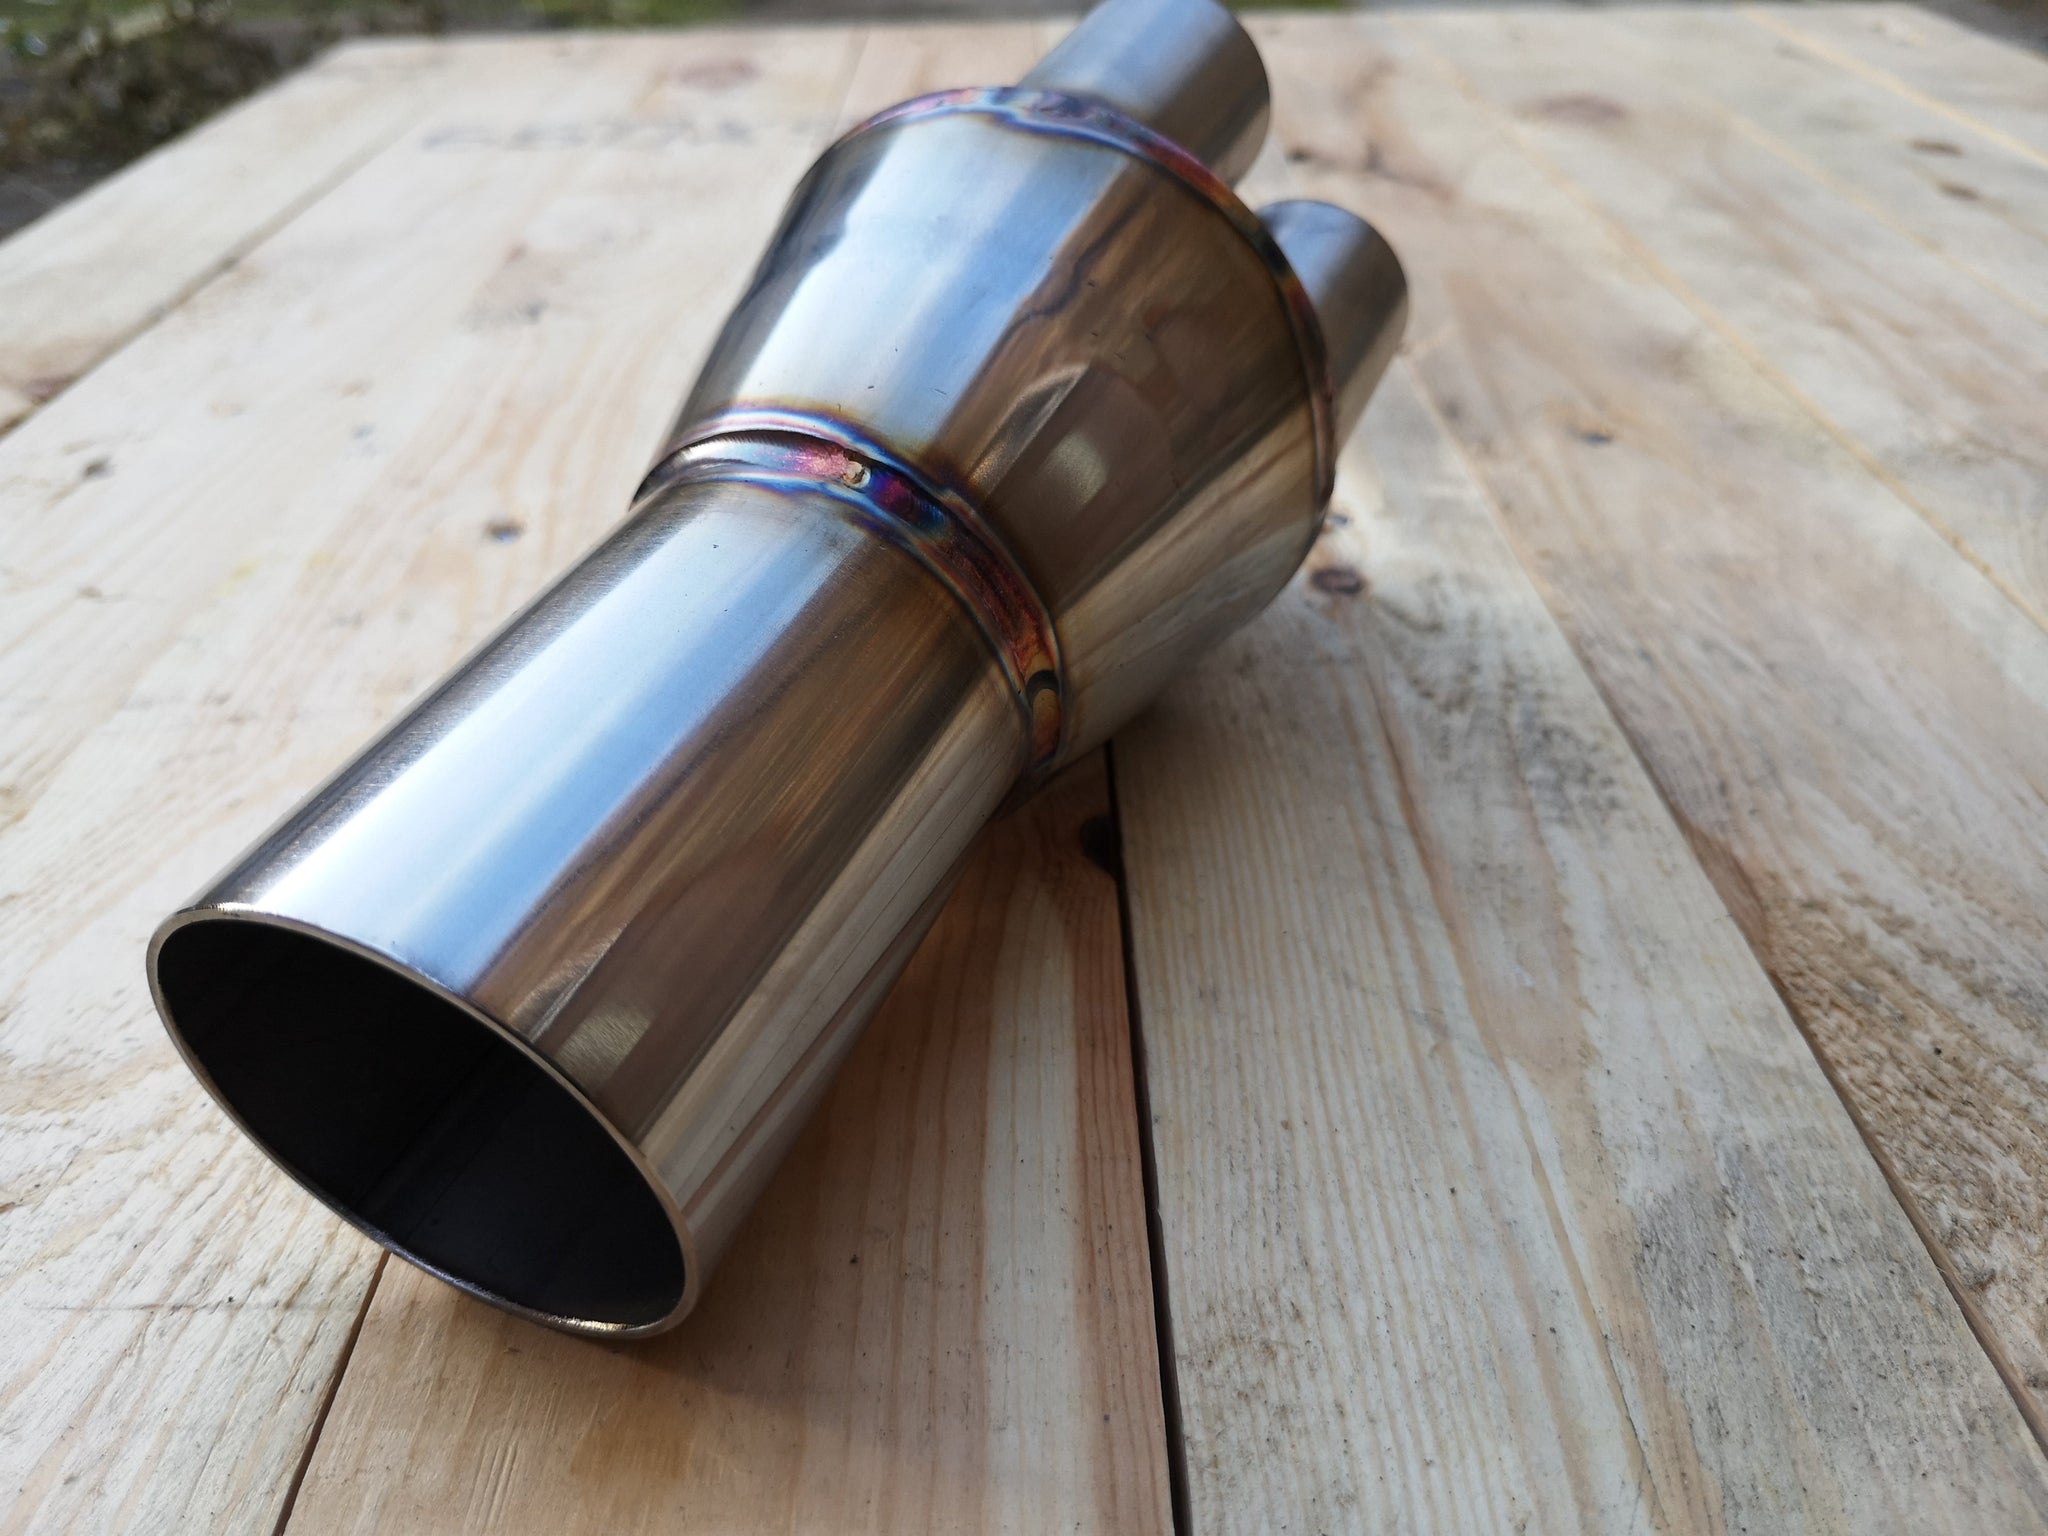 BMW K100/ K1100 Cafe Racer Exhaust Collector 4 to 1